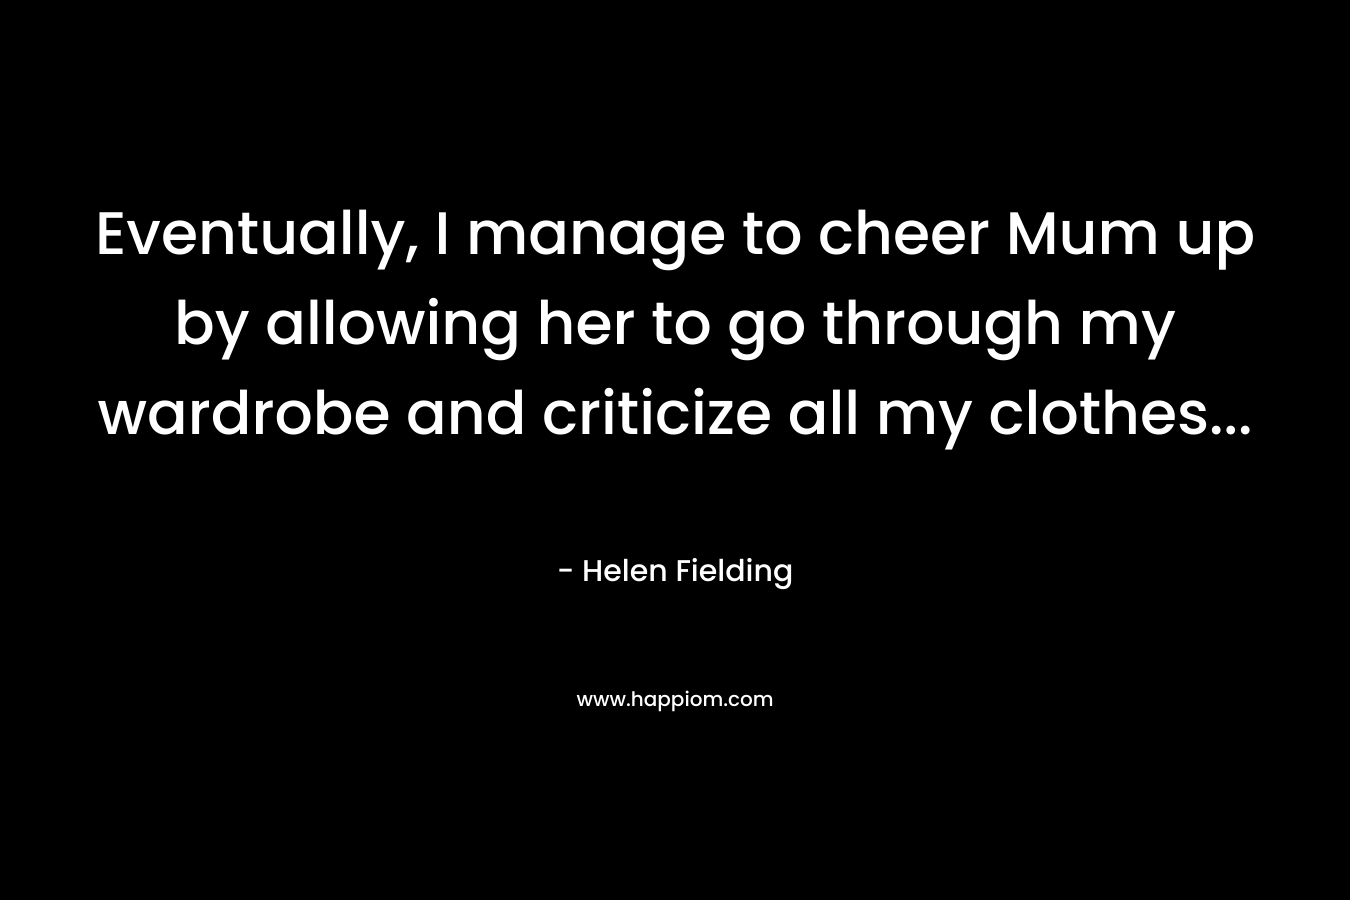 Eventually, I manage to cheer Mum up by allowing her to go through my wardrobe and criticize all my clothes… – Helen Fielding